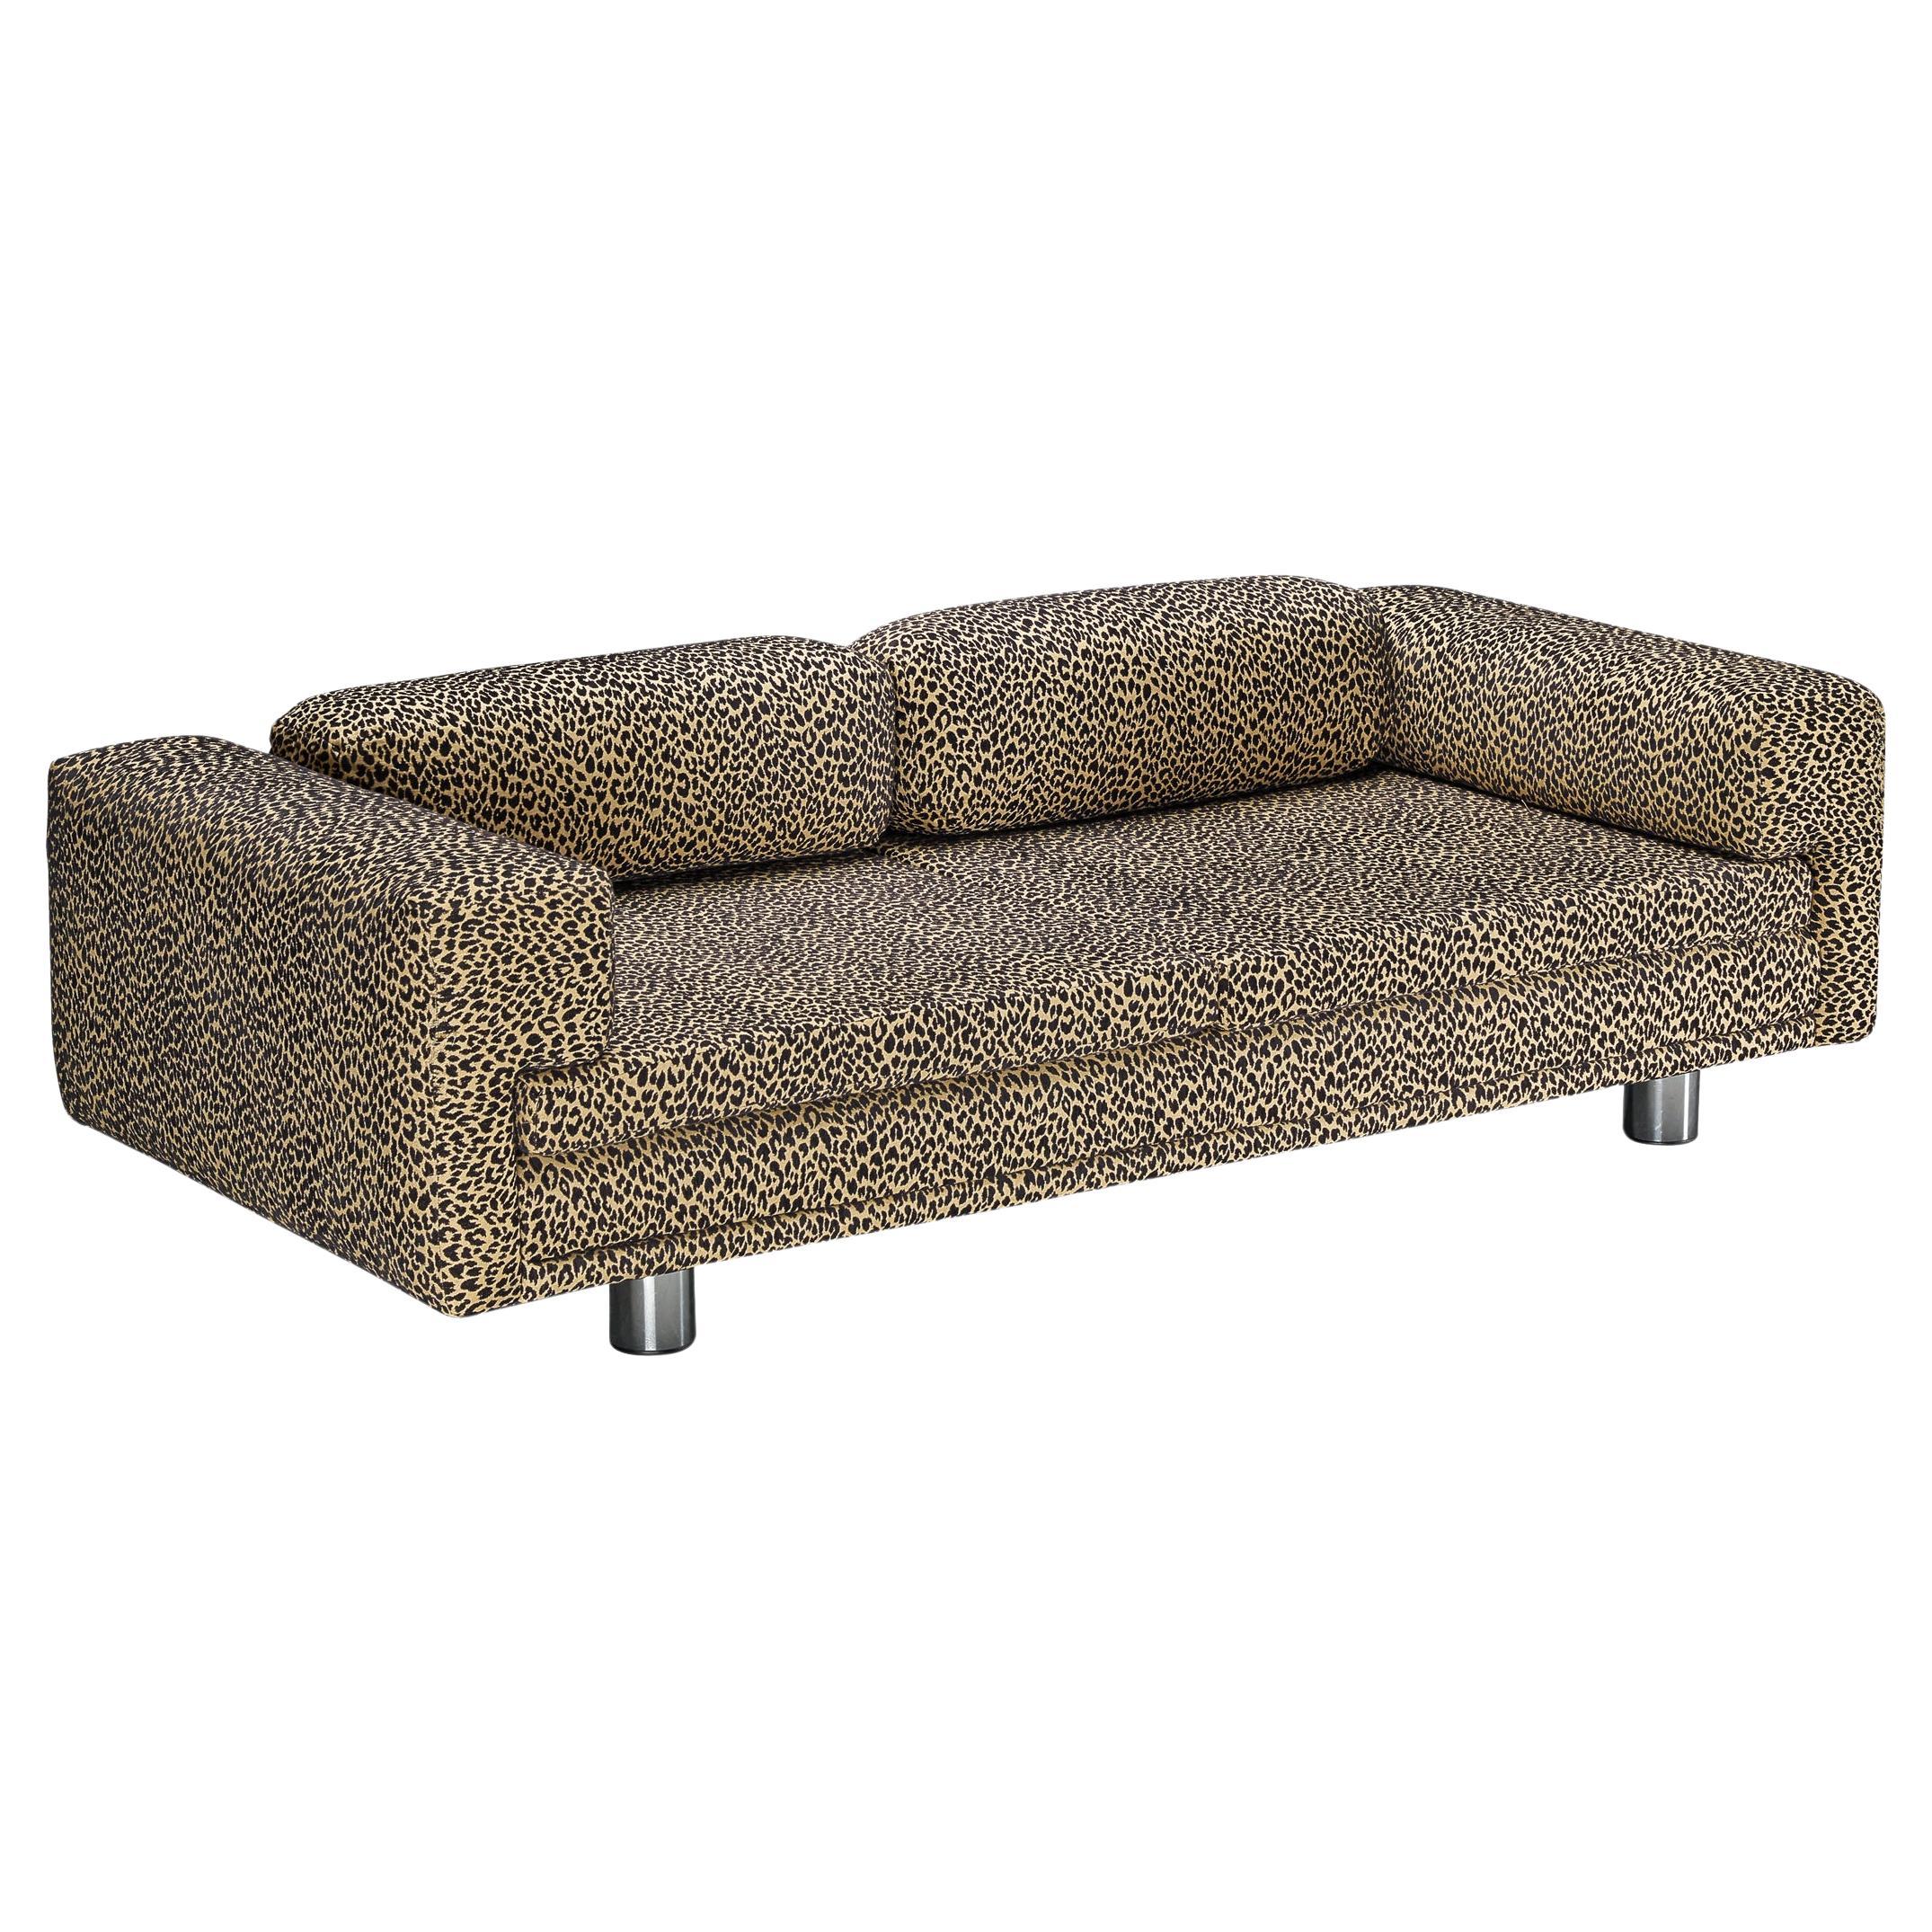 Howard Keith 'Diplomat' Sofa in Leopard Print Upholstery  For Sale